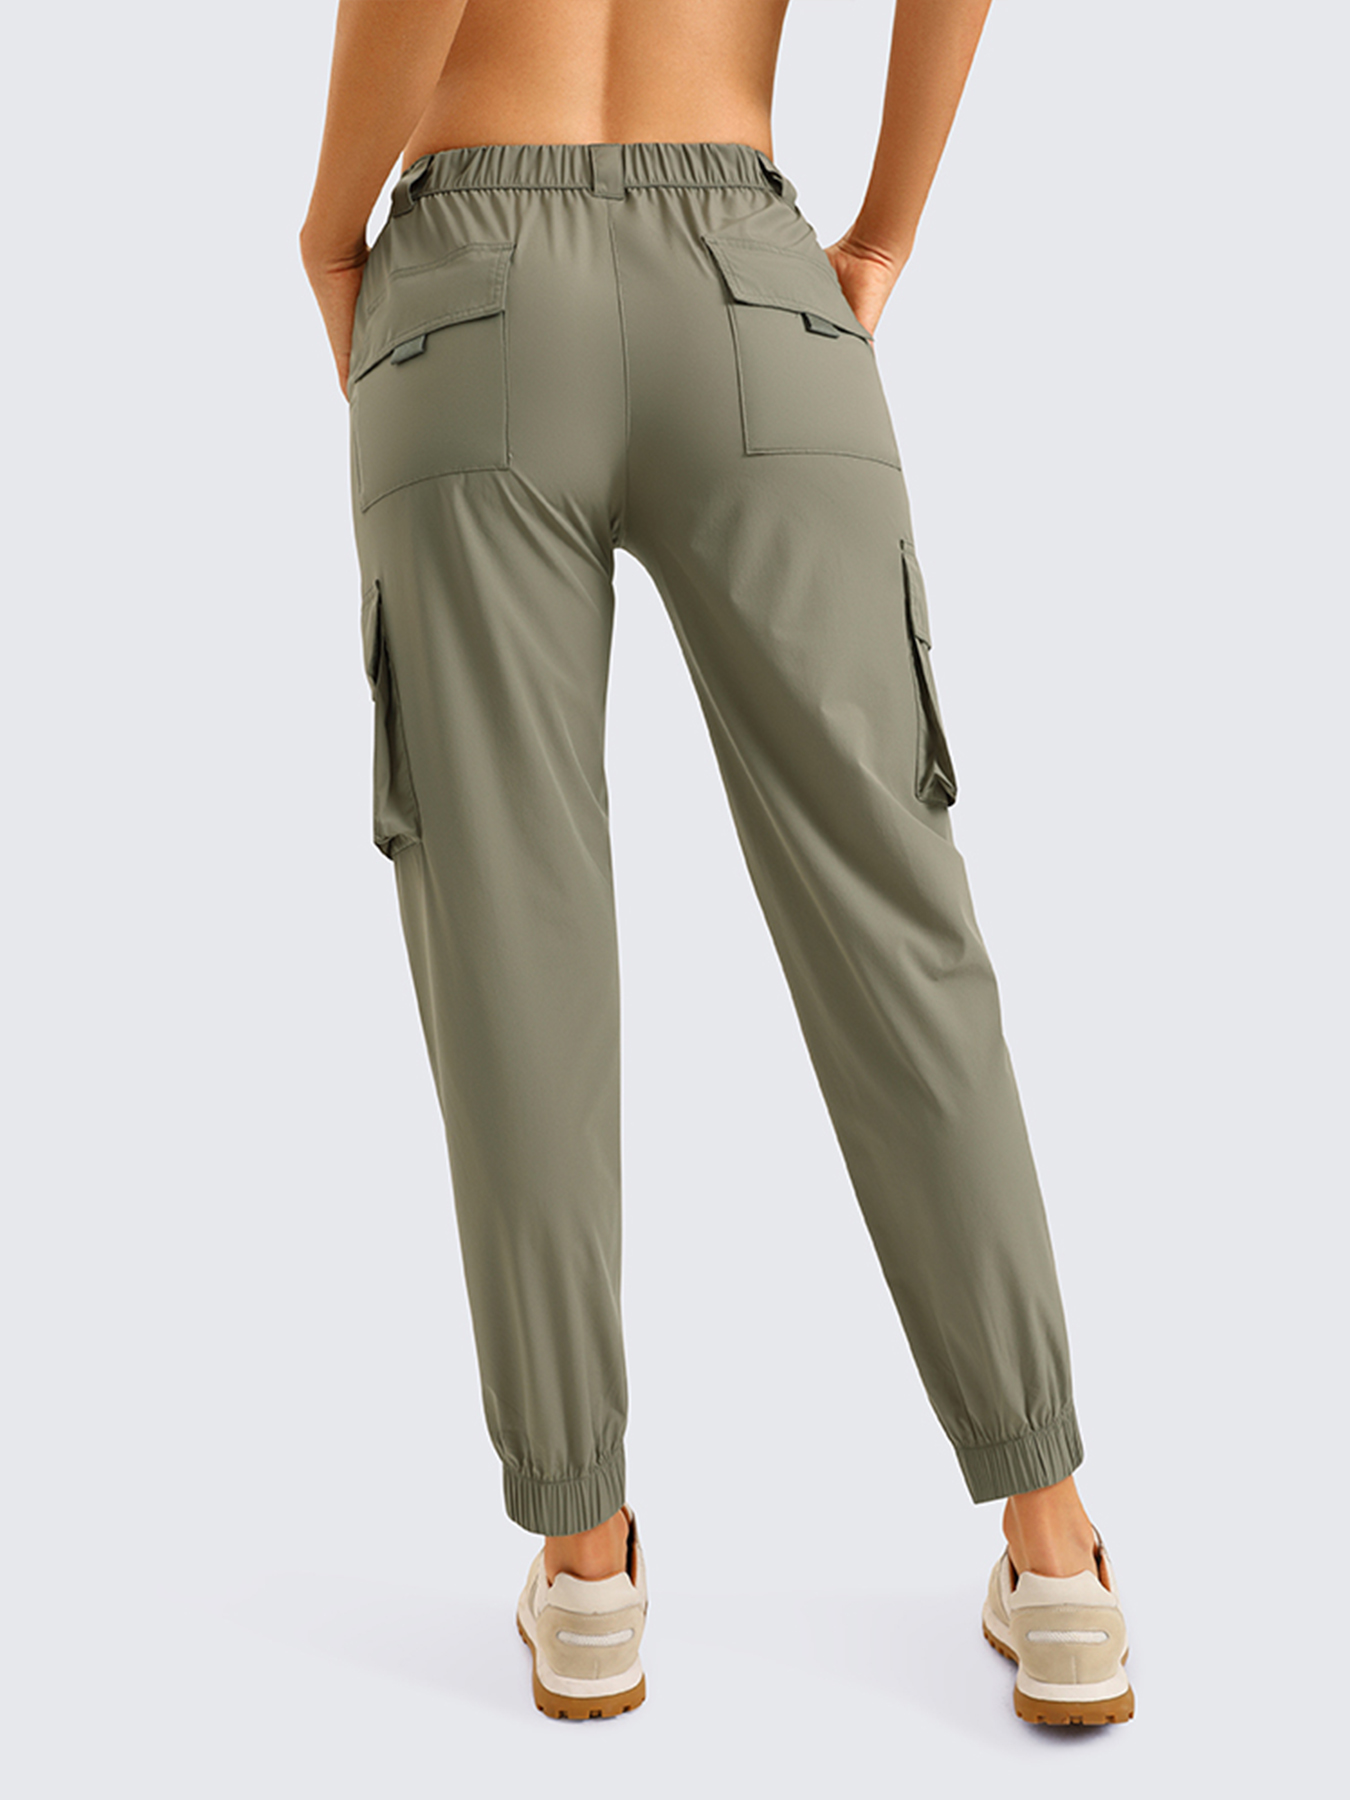  Womens Cargo Jogger Pants Lightweight Athletic